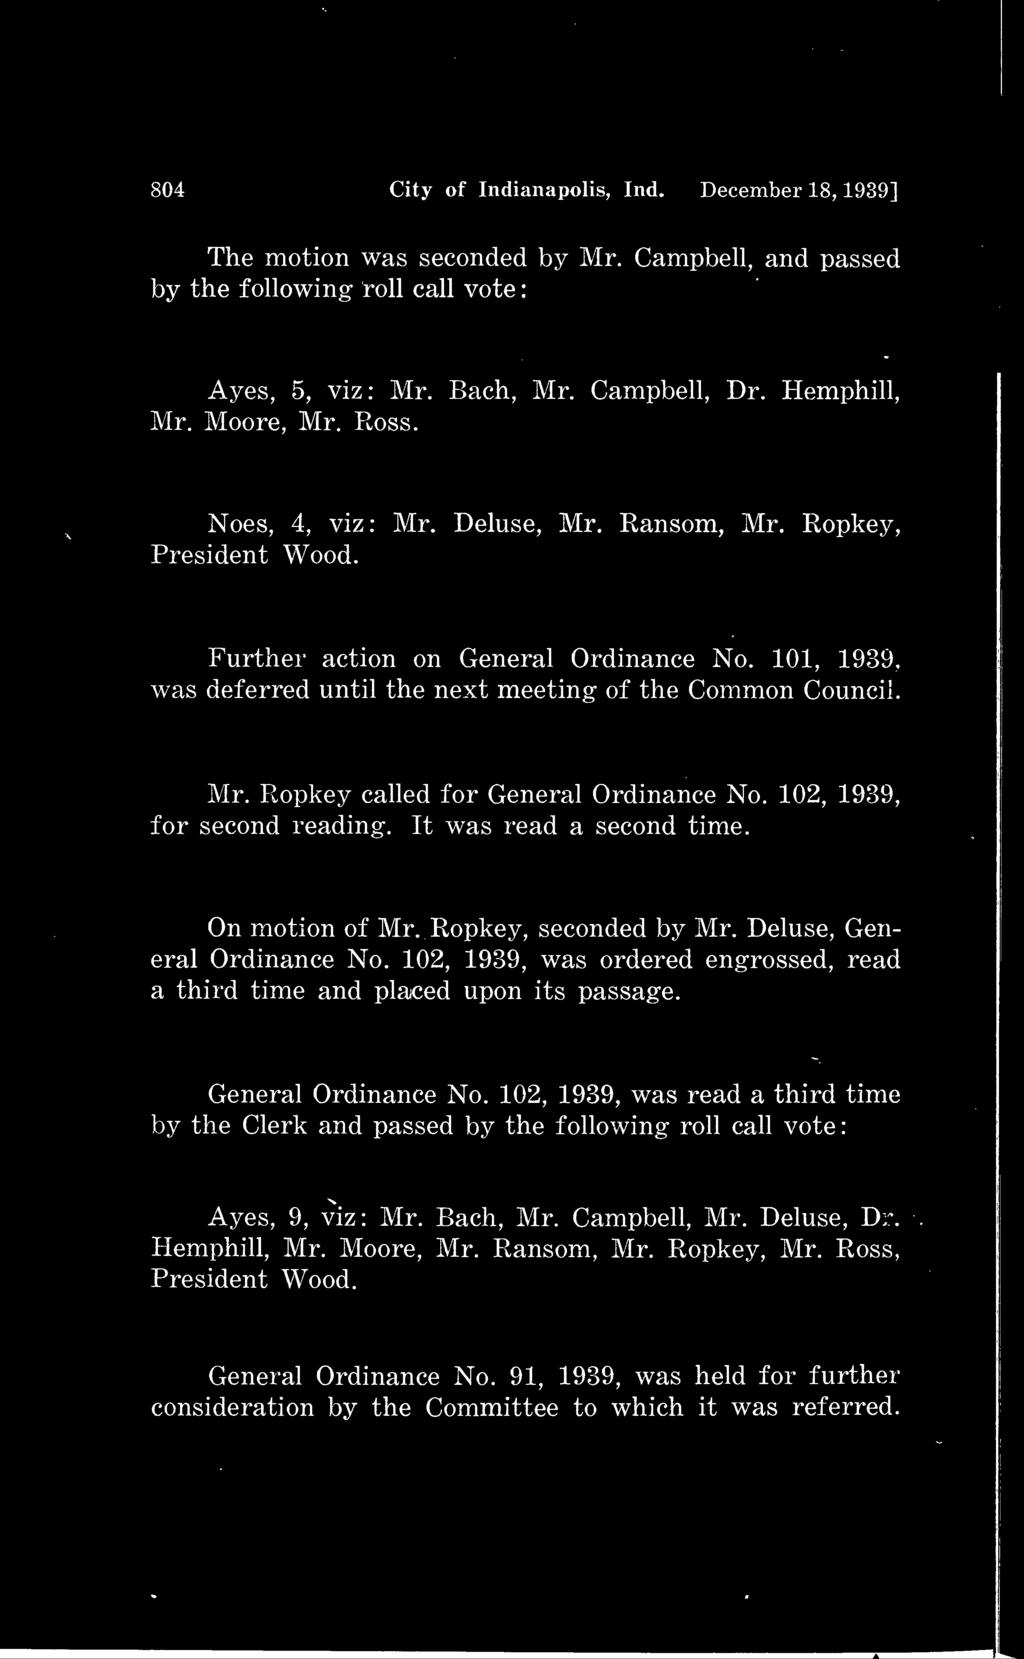 : : 804 City of Indianapolis, Ind. December 18, 1939] The motion was seconded by Mr. Campbell, and passed by the following roll call vote Ayes, 5, viz: Mr. Bach, Mr. Campbell, Dr. Hemphill, Mr.